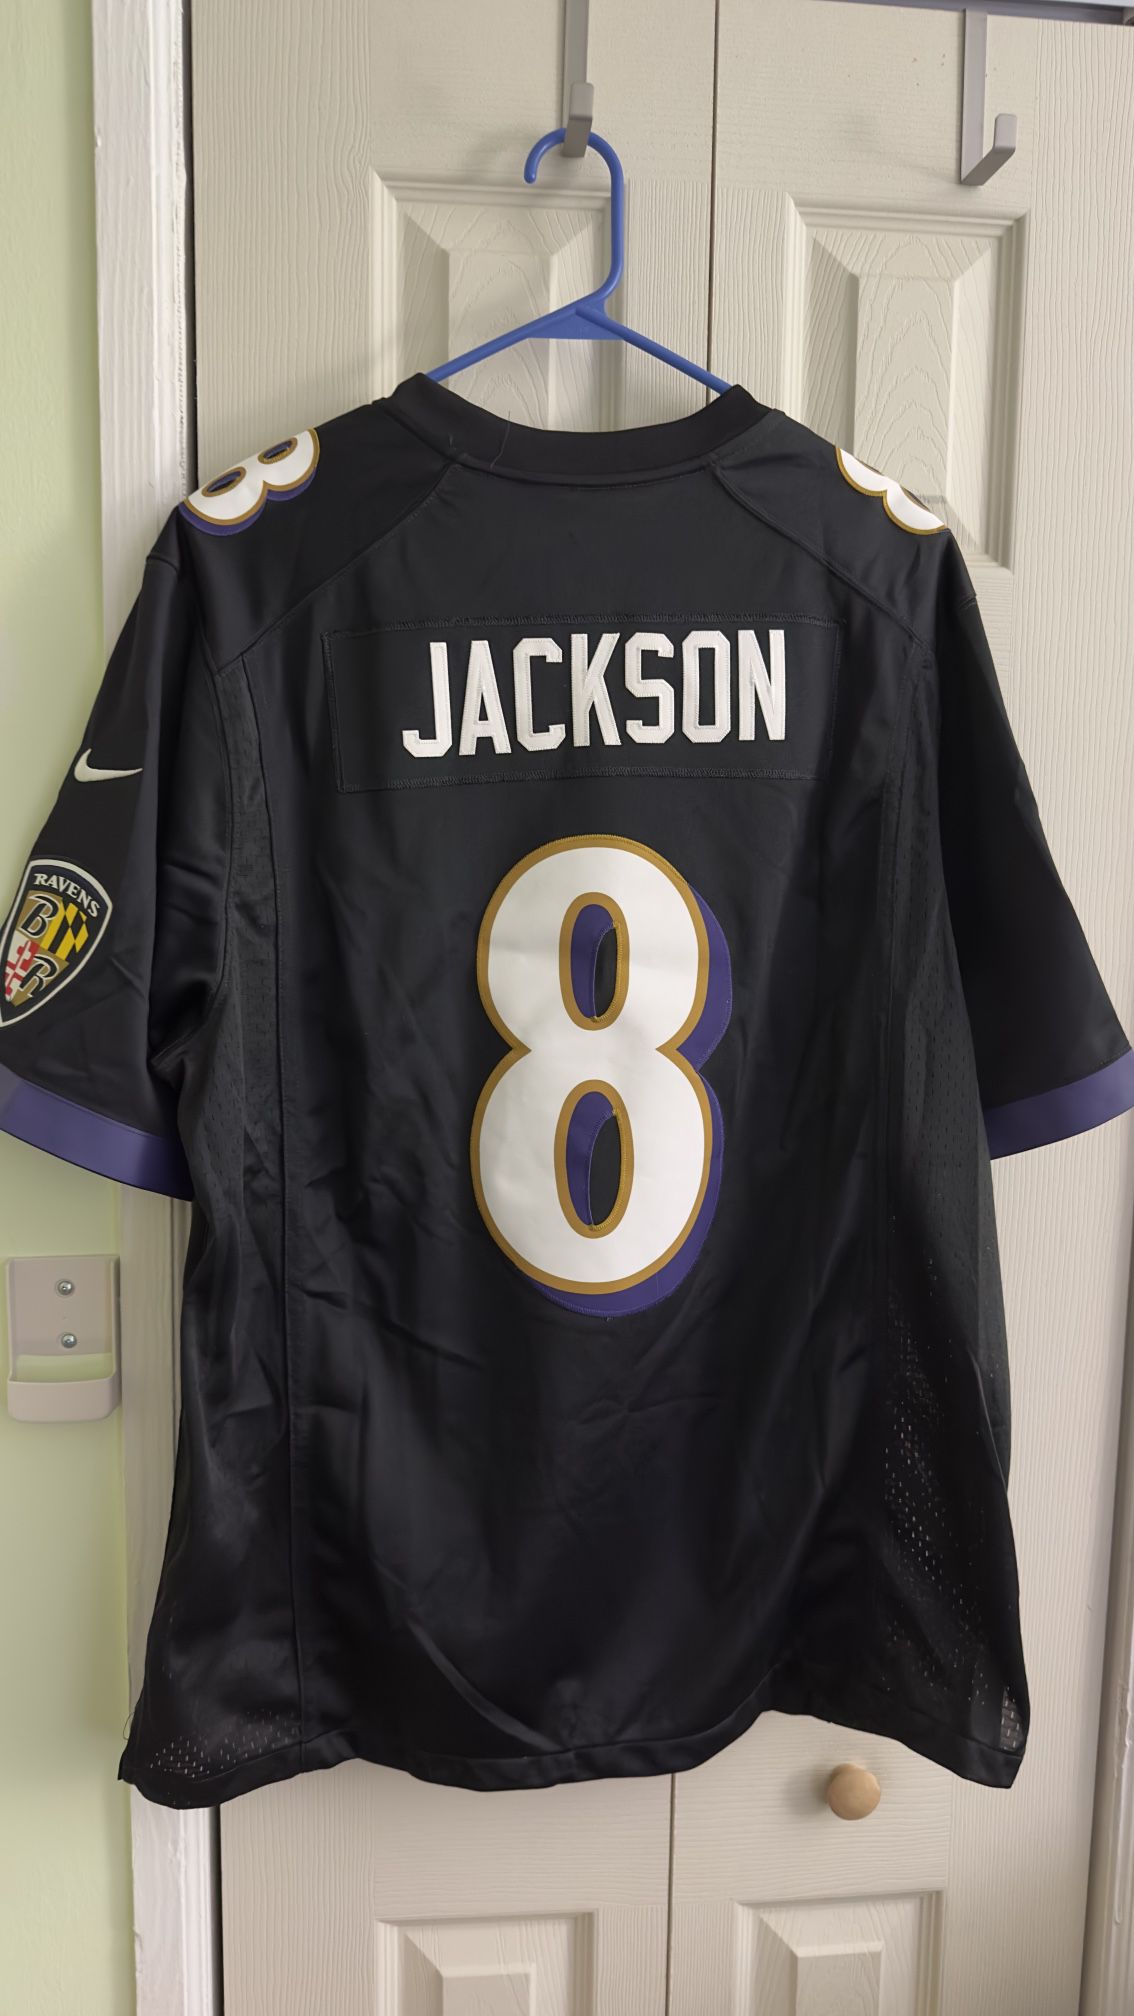 authentic ravens jersey stitched